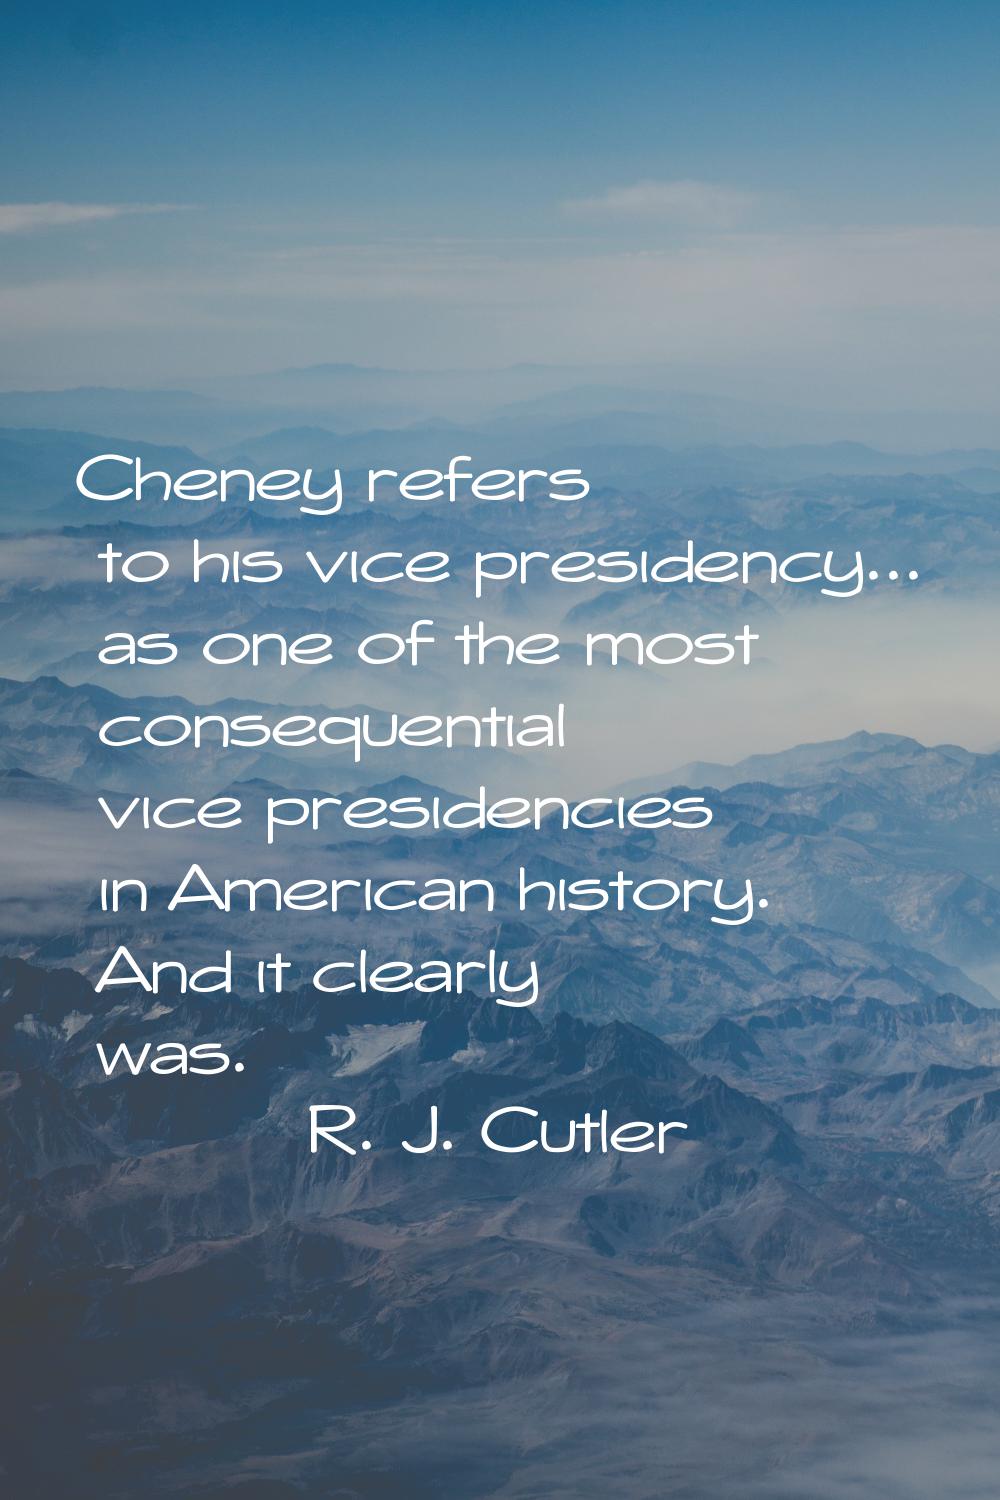 Cheney refers to his vice presidency... as one of the most consequential vice presidencies in Ameri